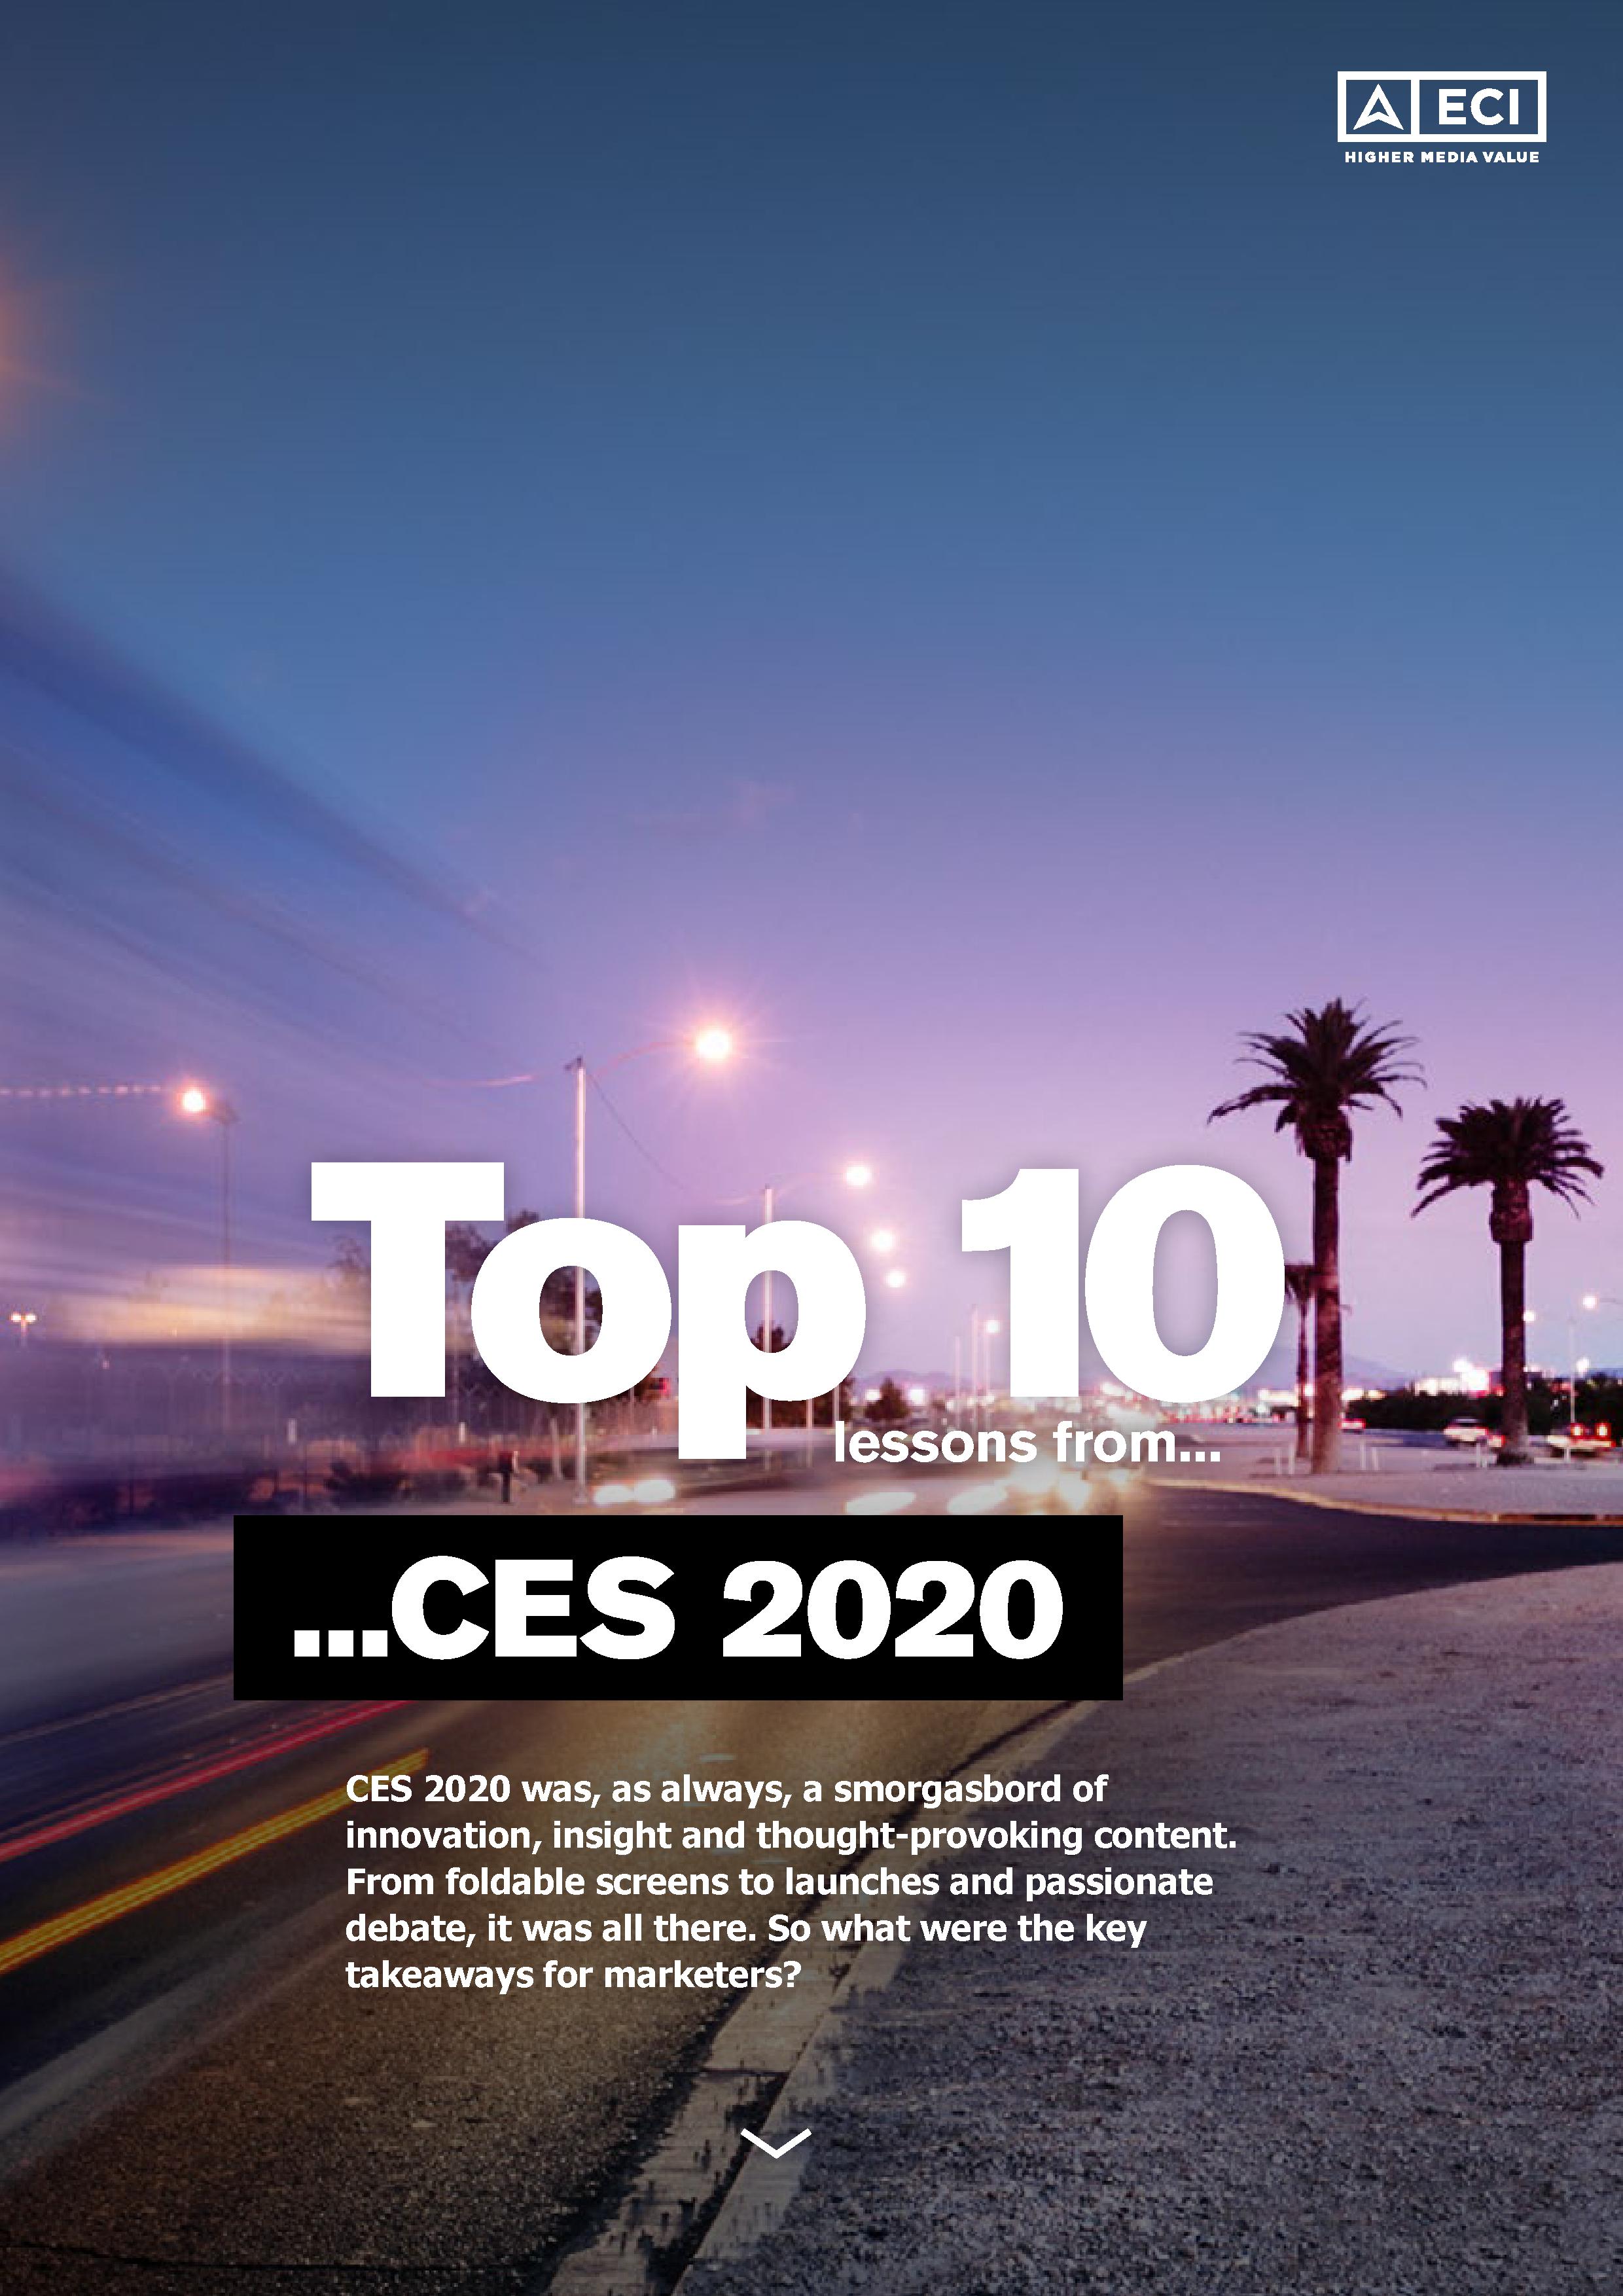 Top 10 learnings from CES 2020